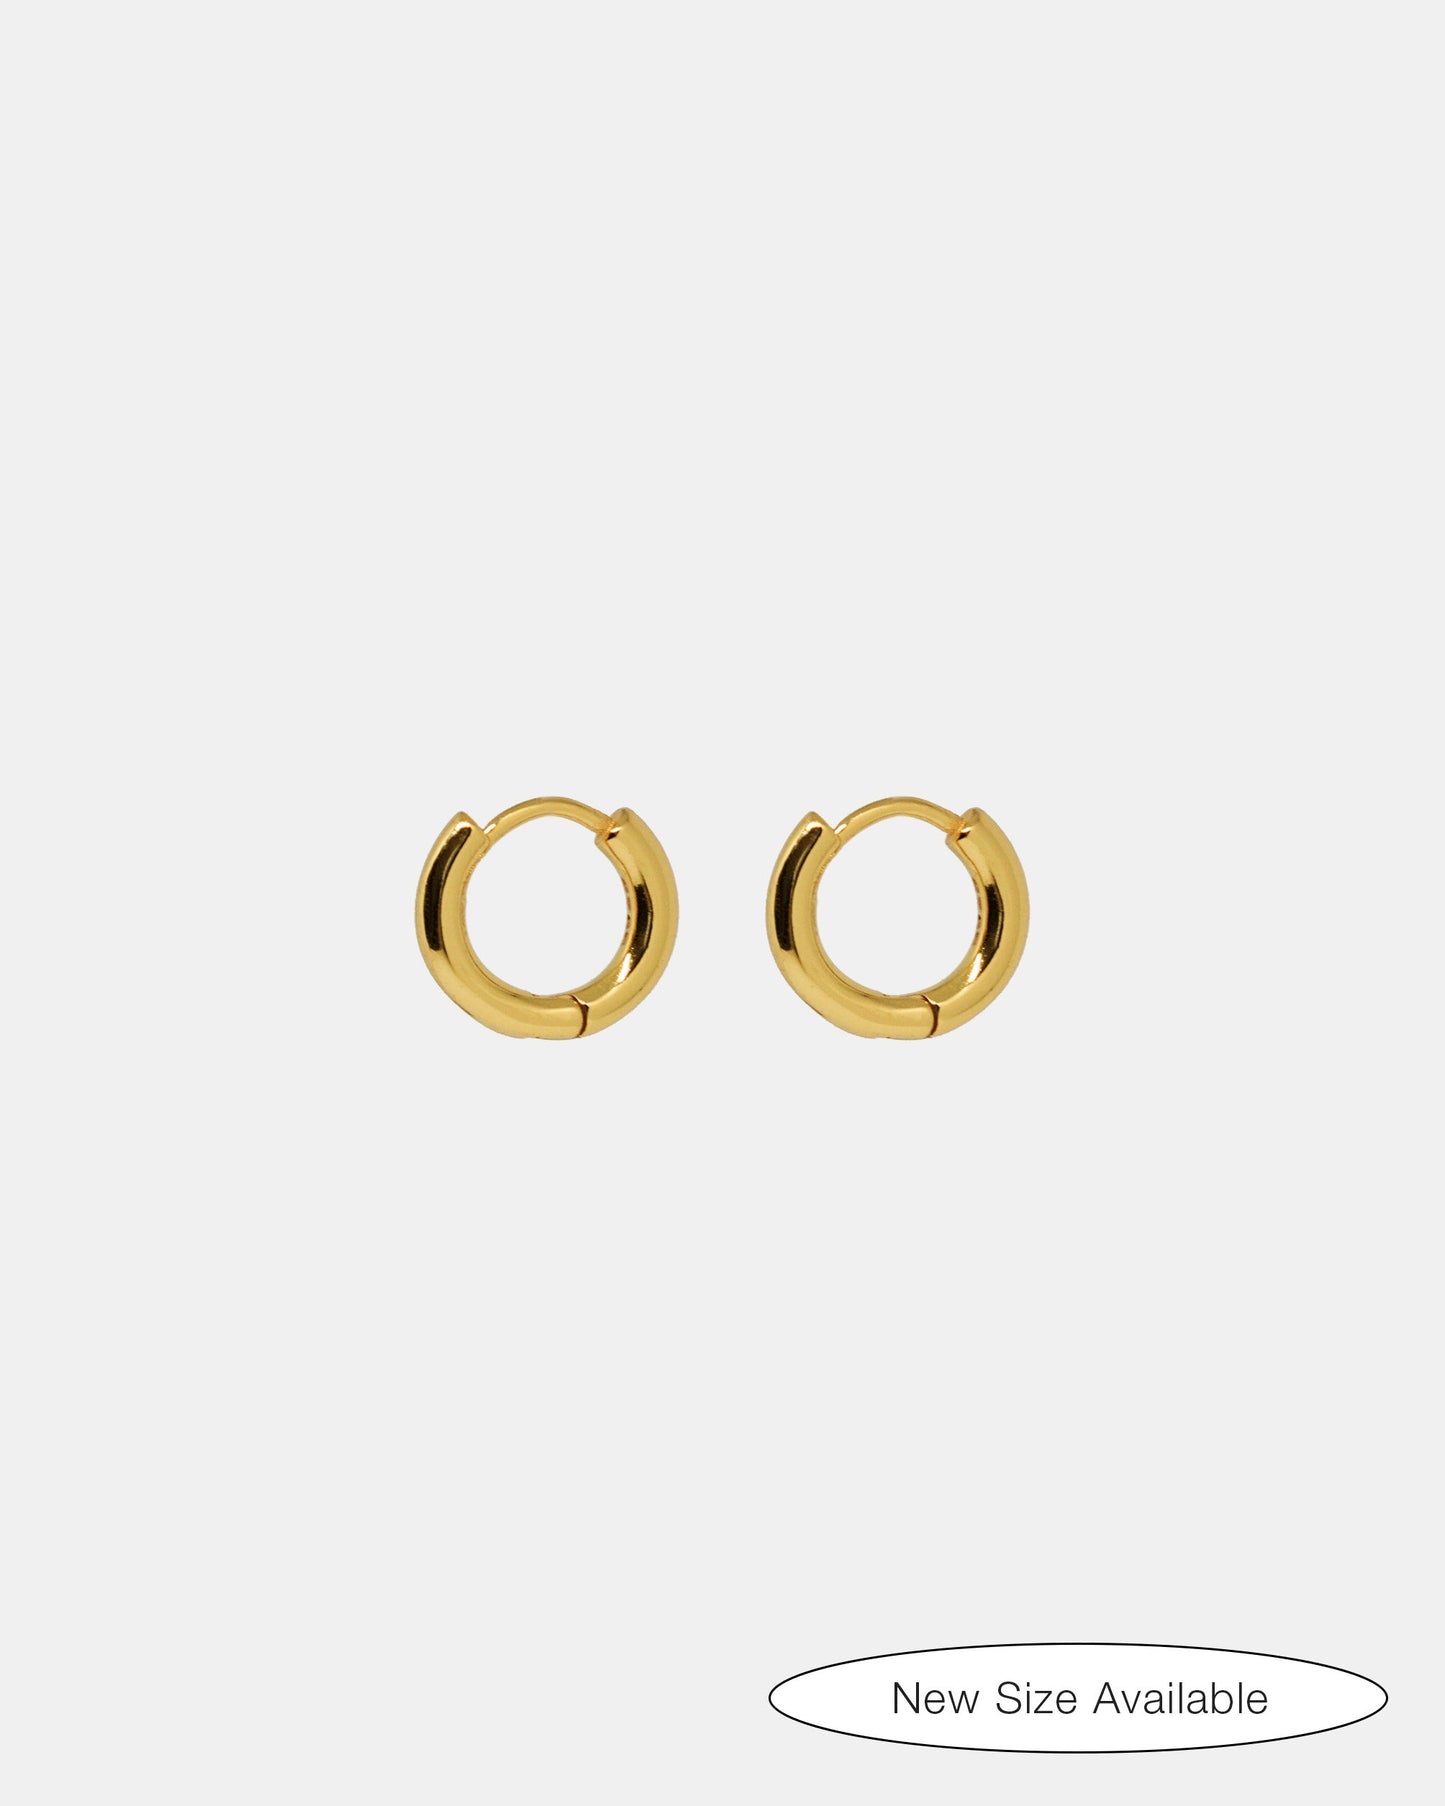 [Reject] Mini Hoops in Gold